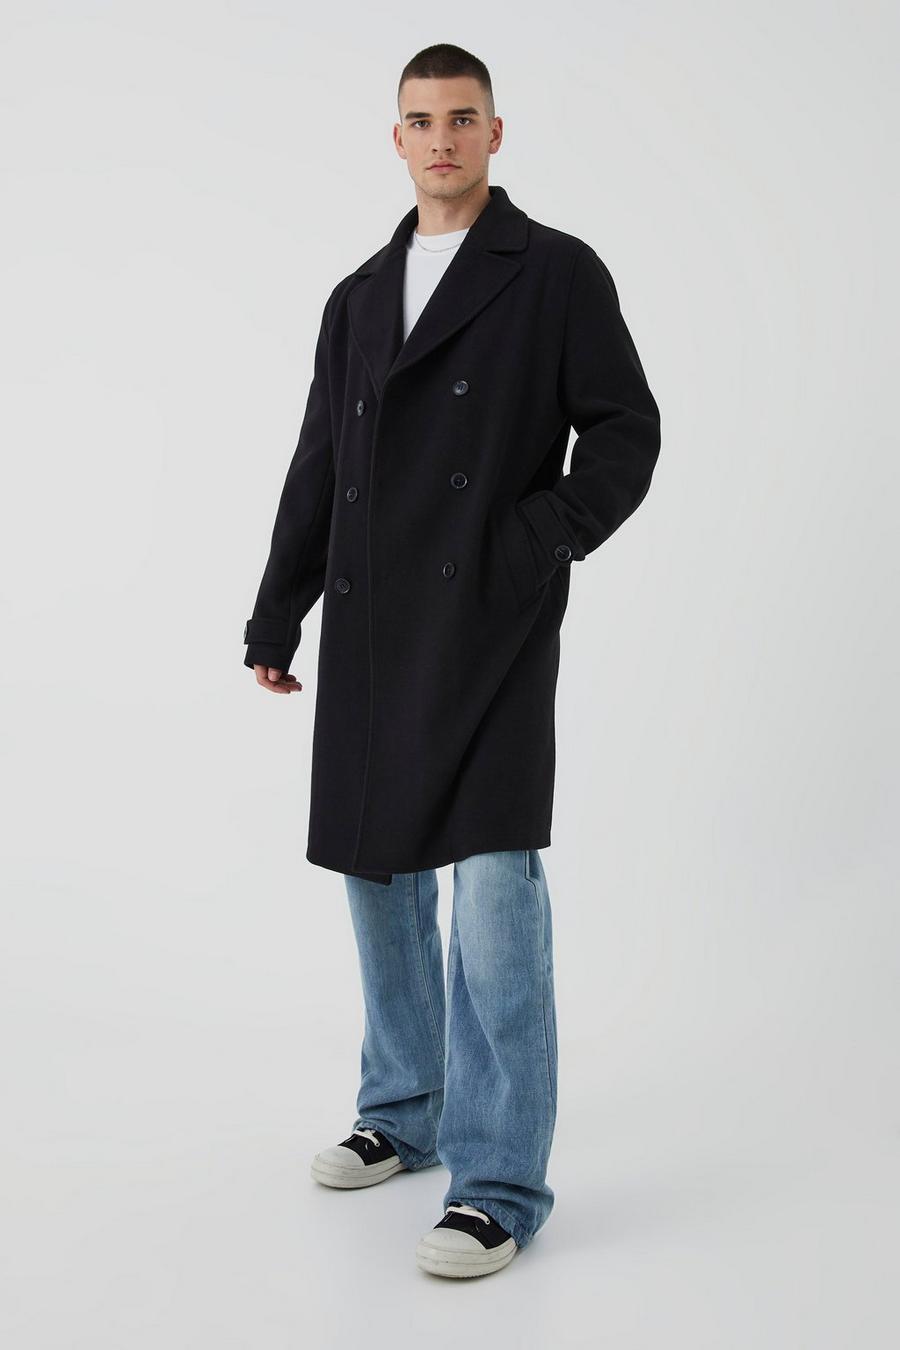 Black Tall Double Breasted Wool Look Overcoat